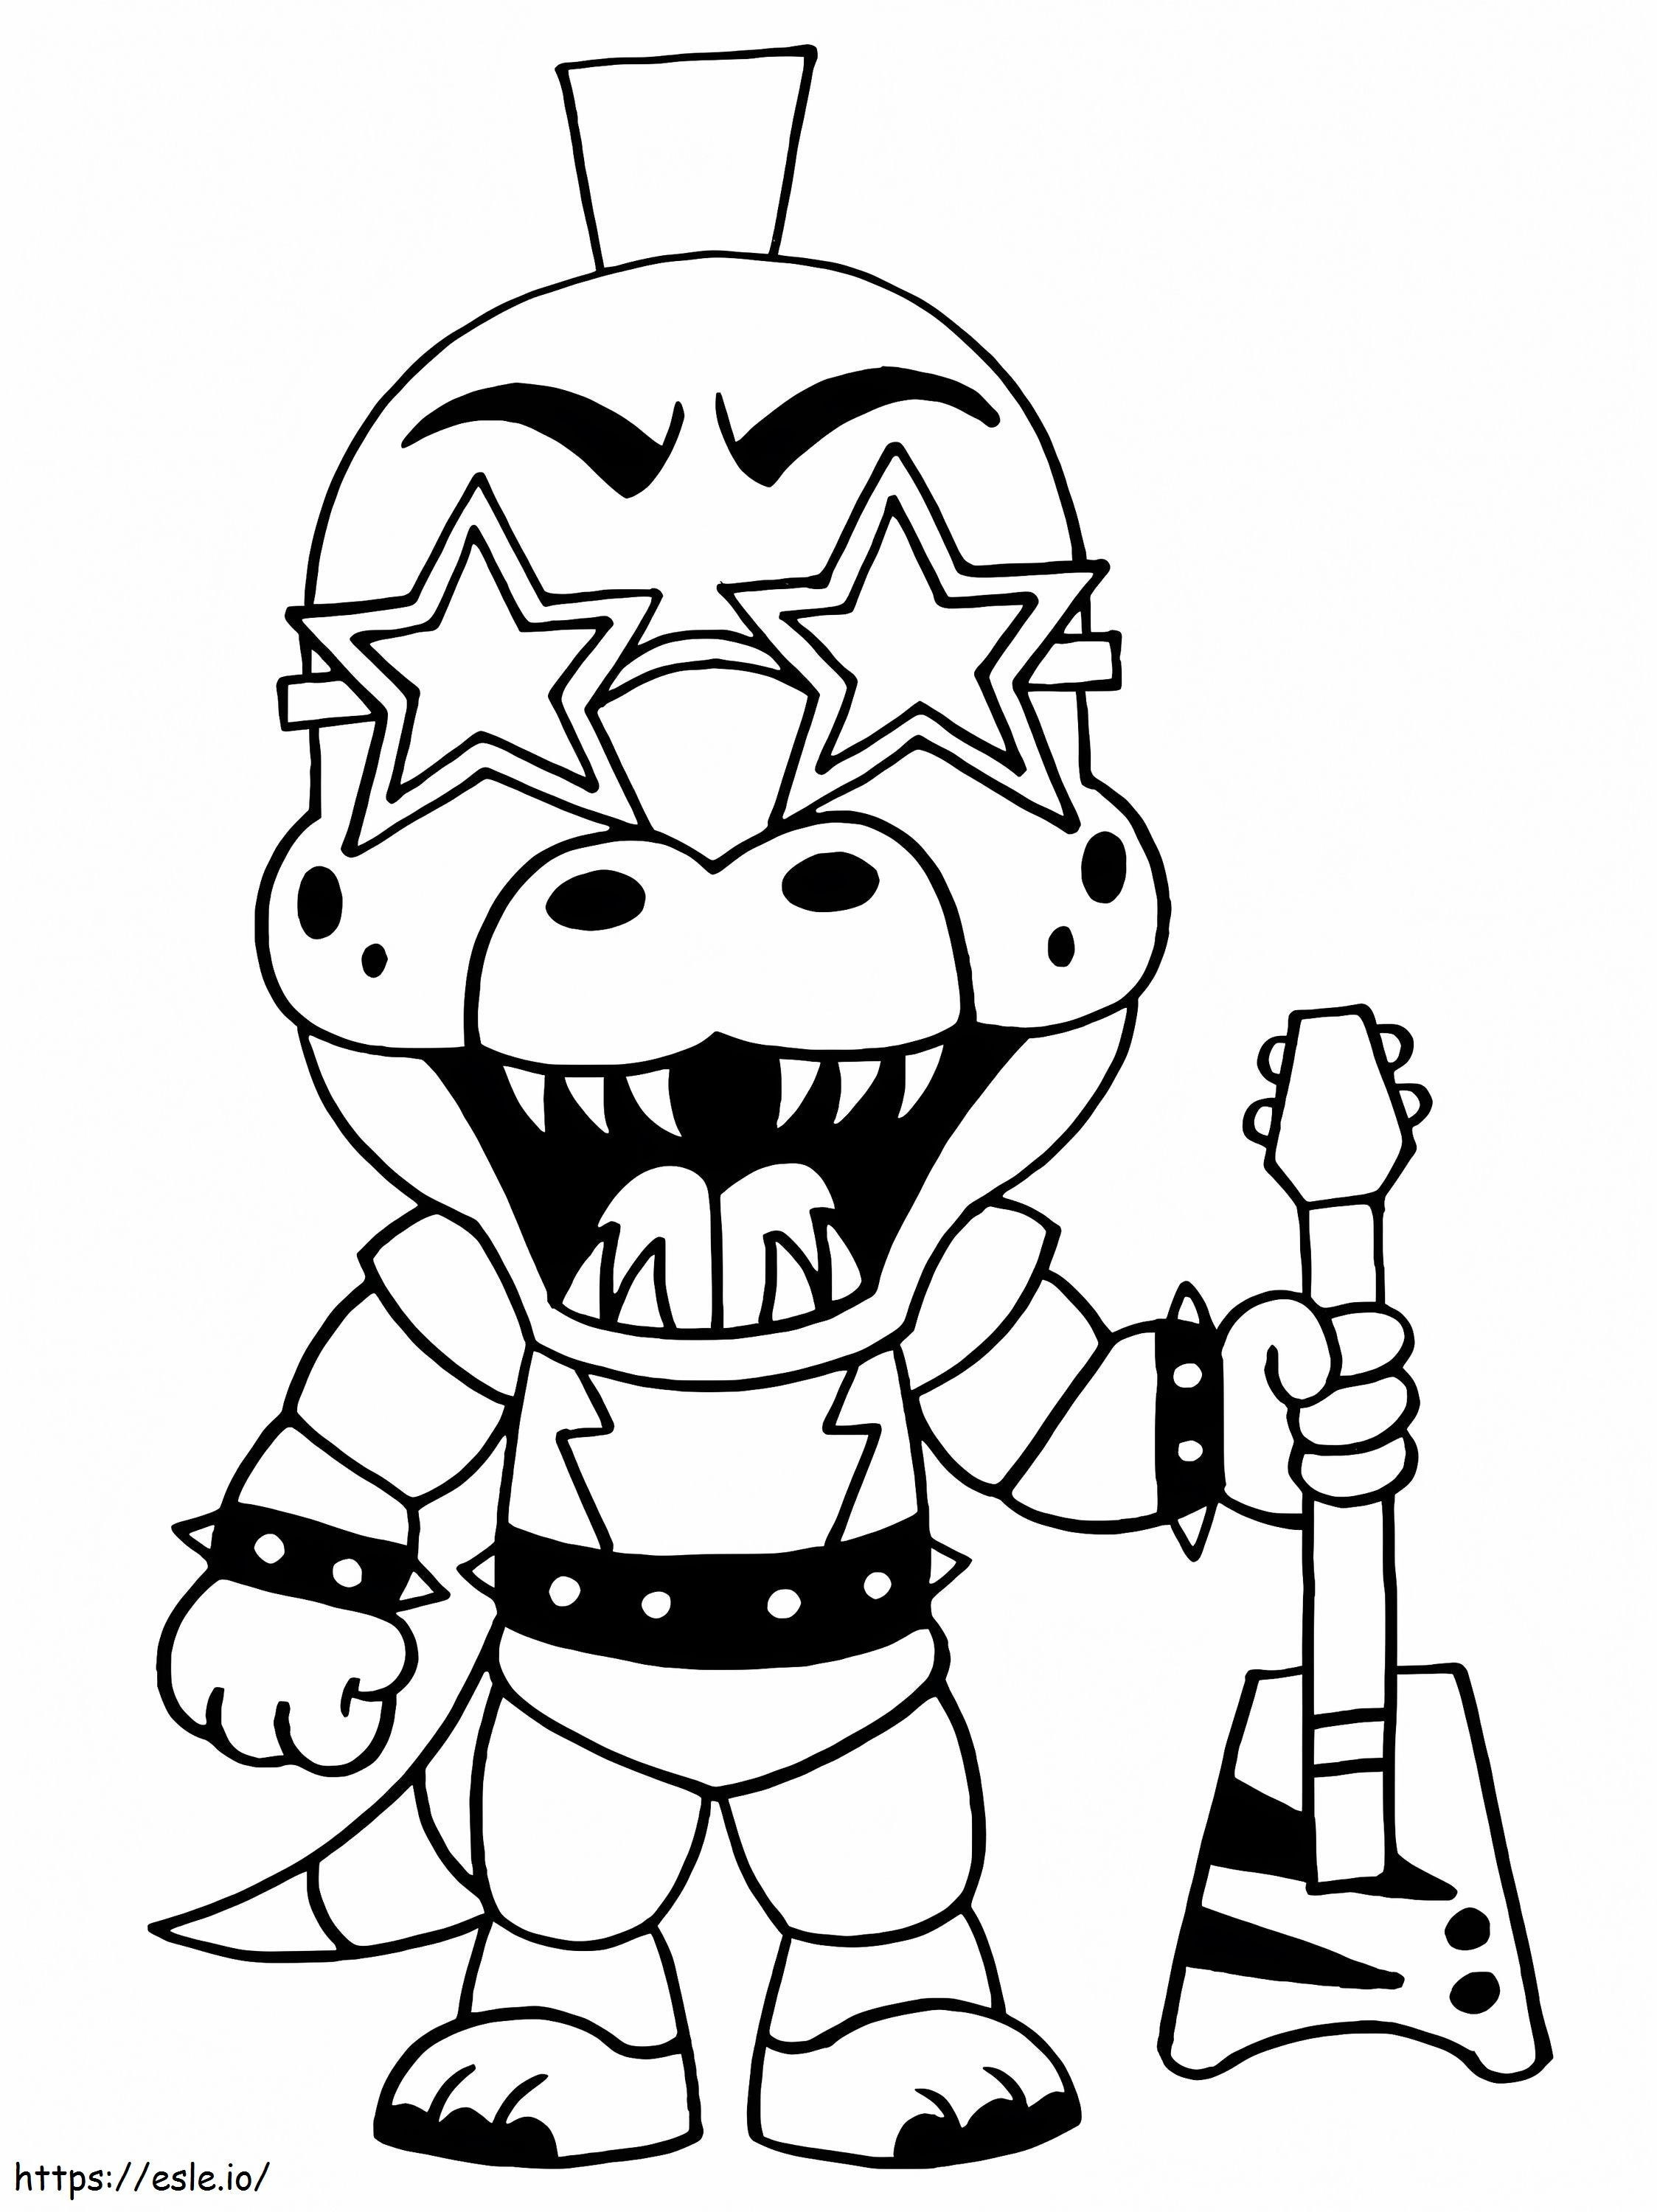 Funny Montgomery Gator coloring page